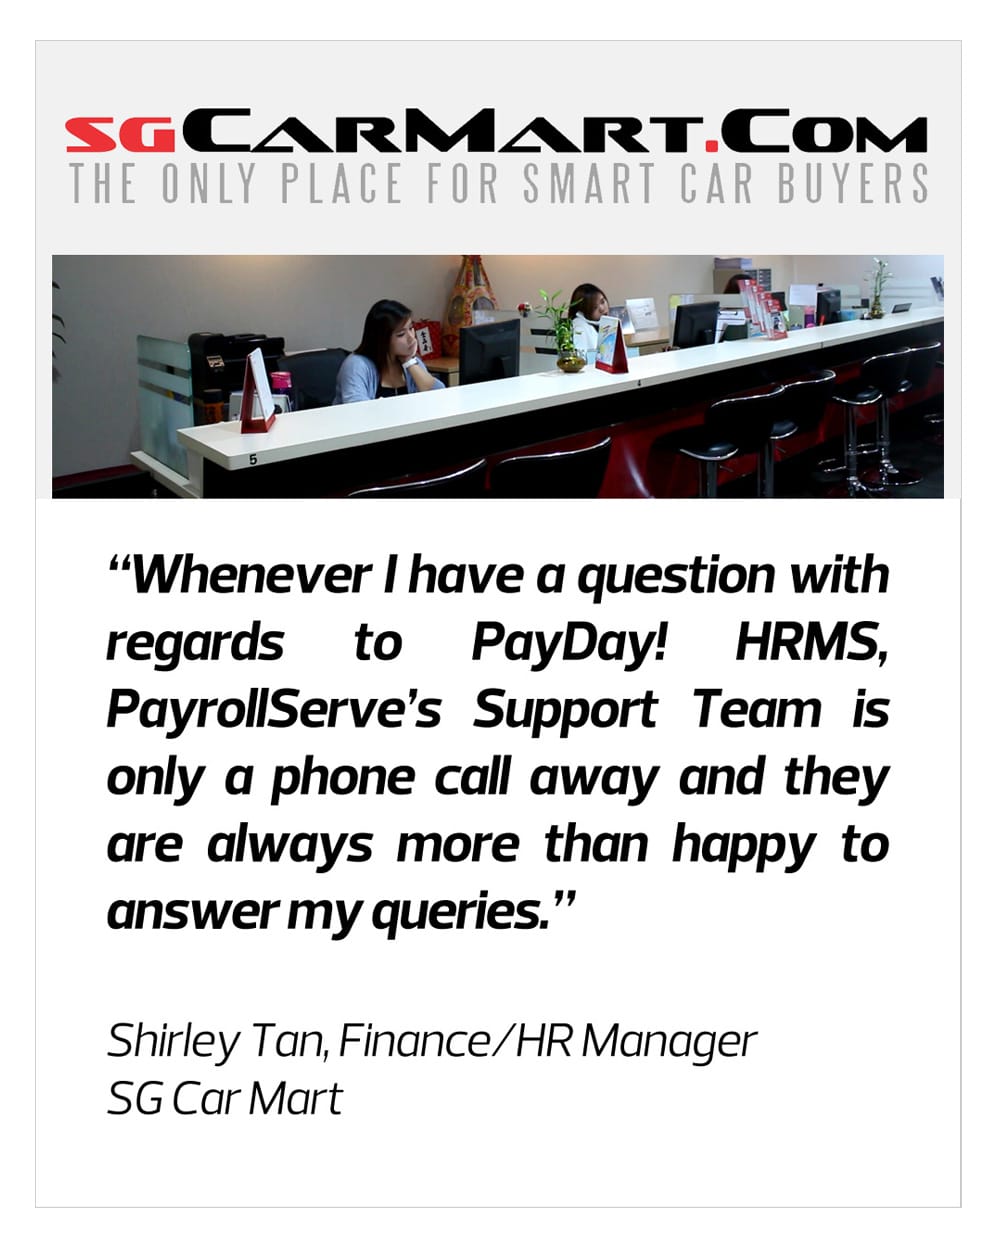 Whenever I have a question with regards to PaYDAy! HRMS, PayrollServe's Support Team is only a phone call away and they are always happy to answer my queries- SG Car Mart